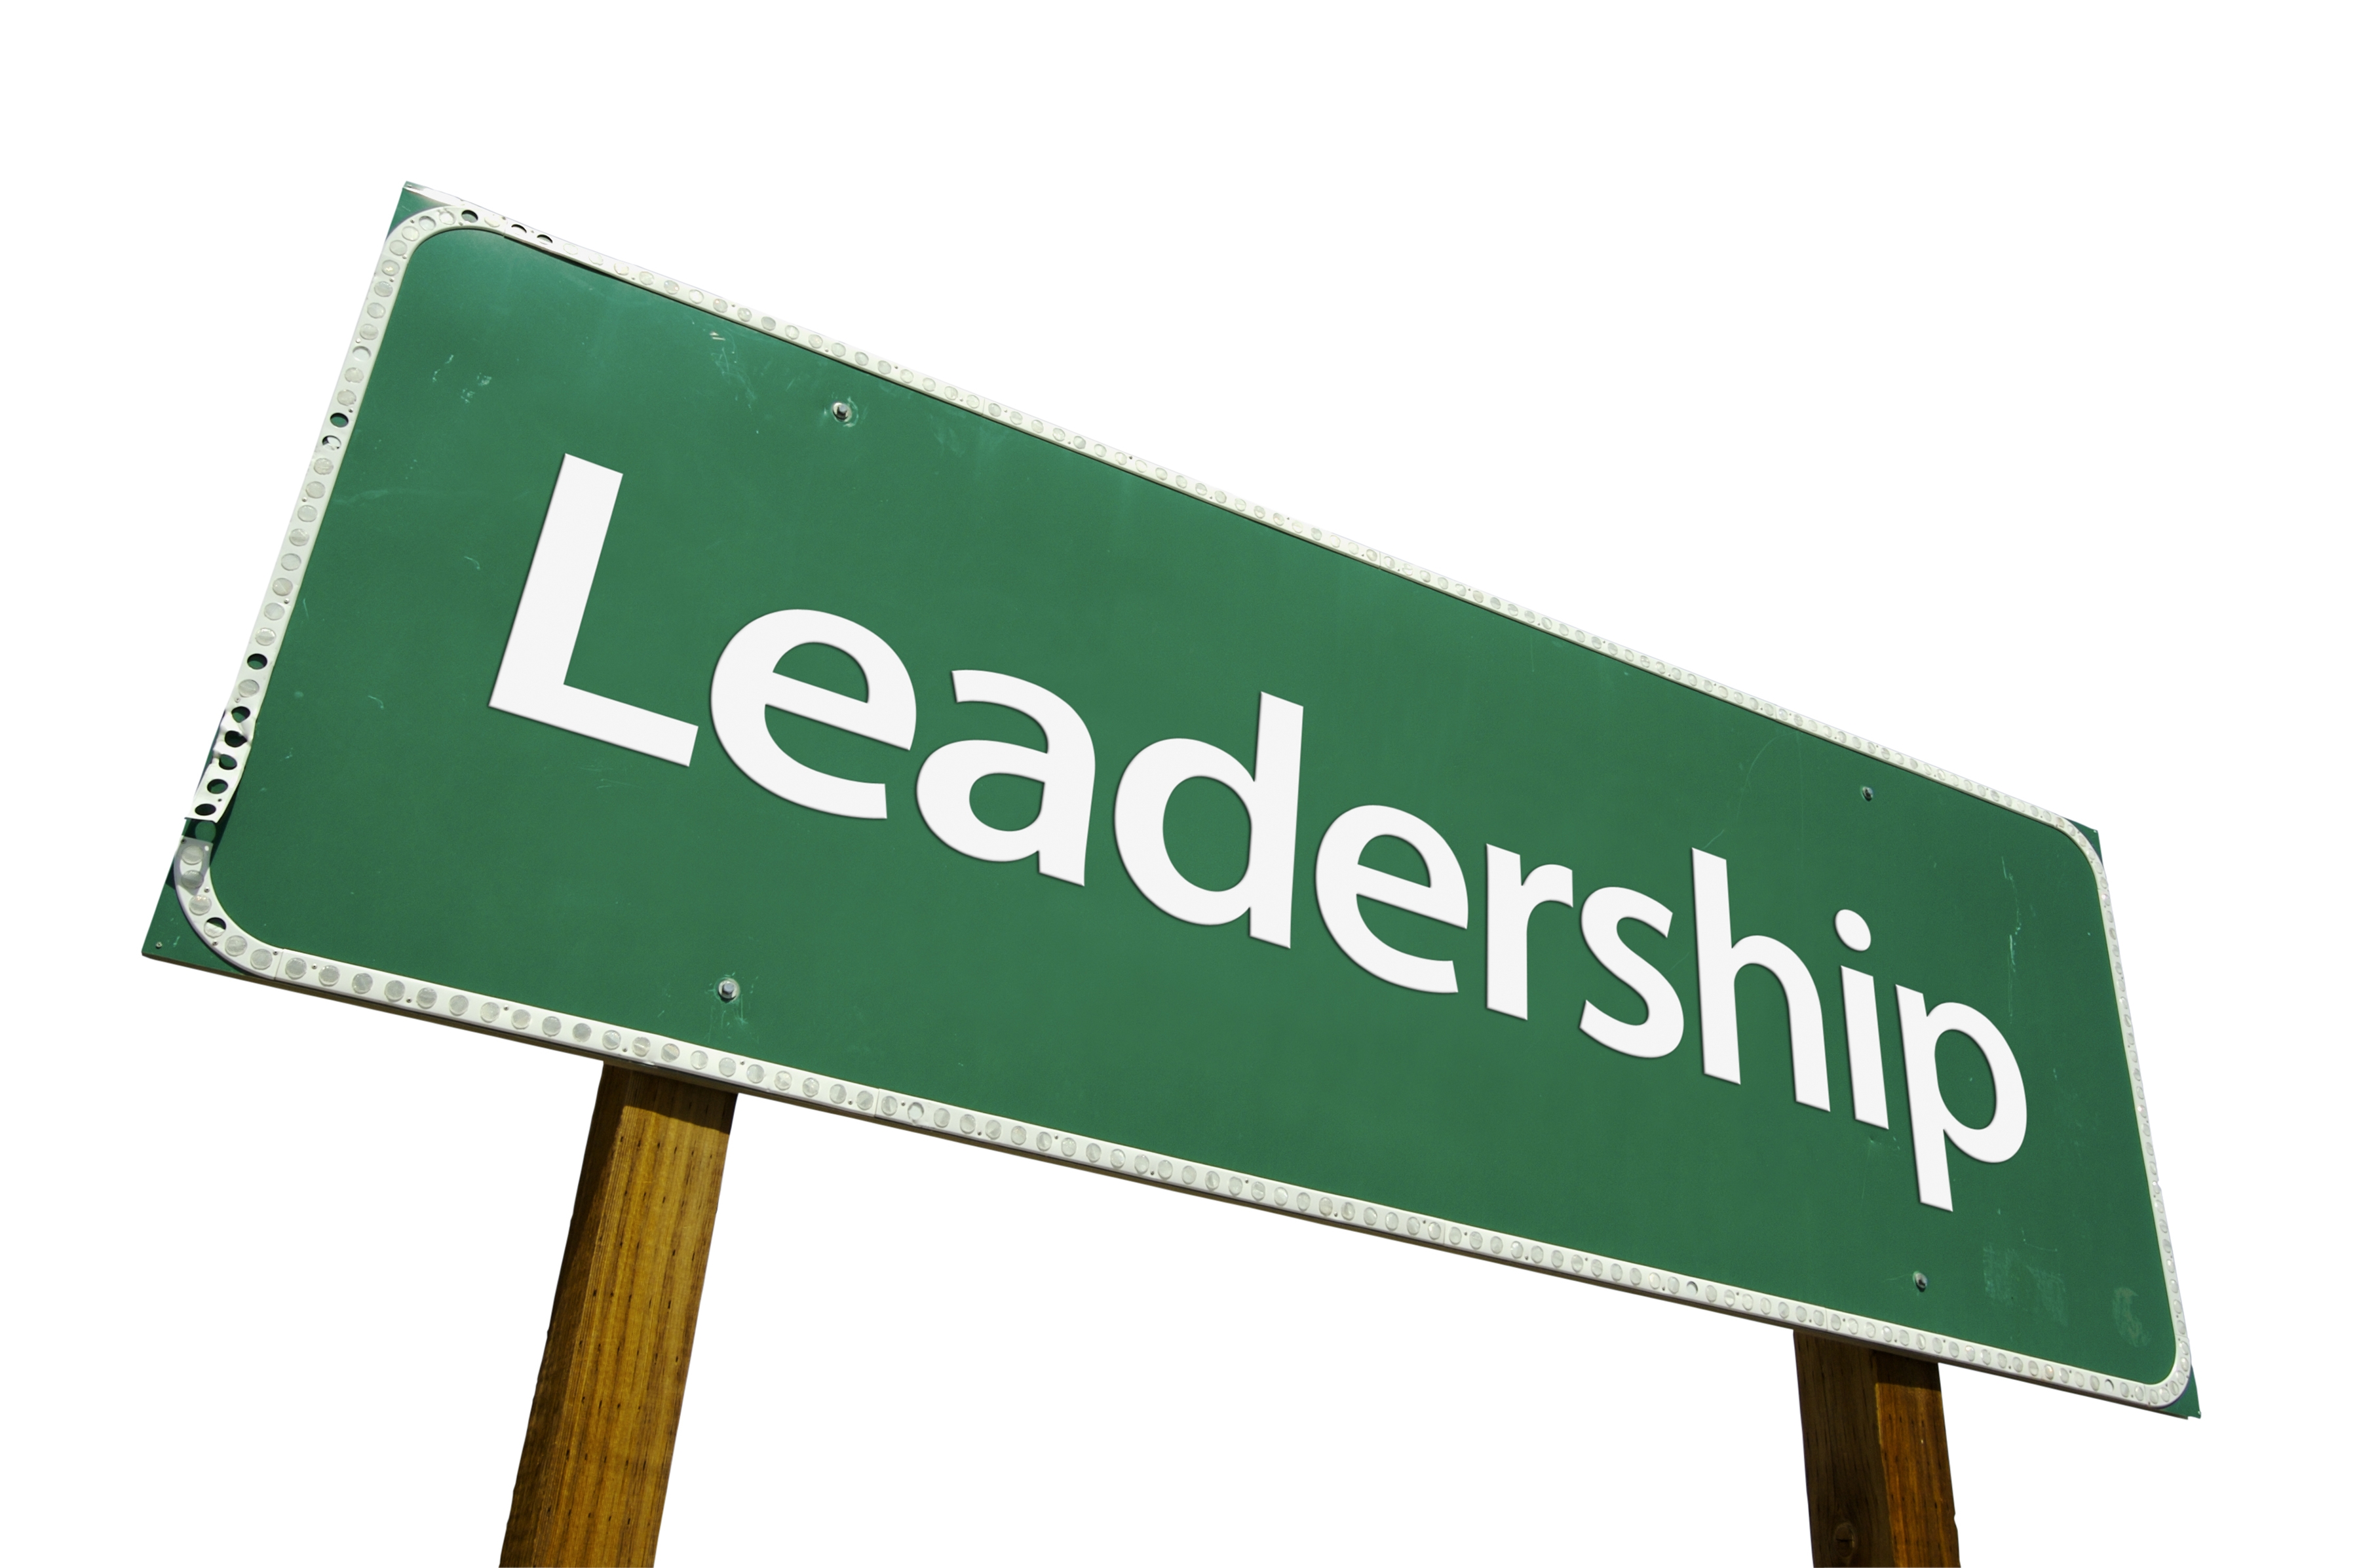 free clipart images leadership - photo #25